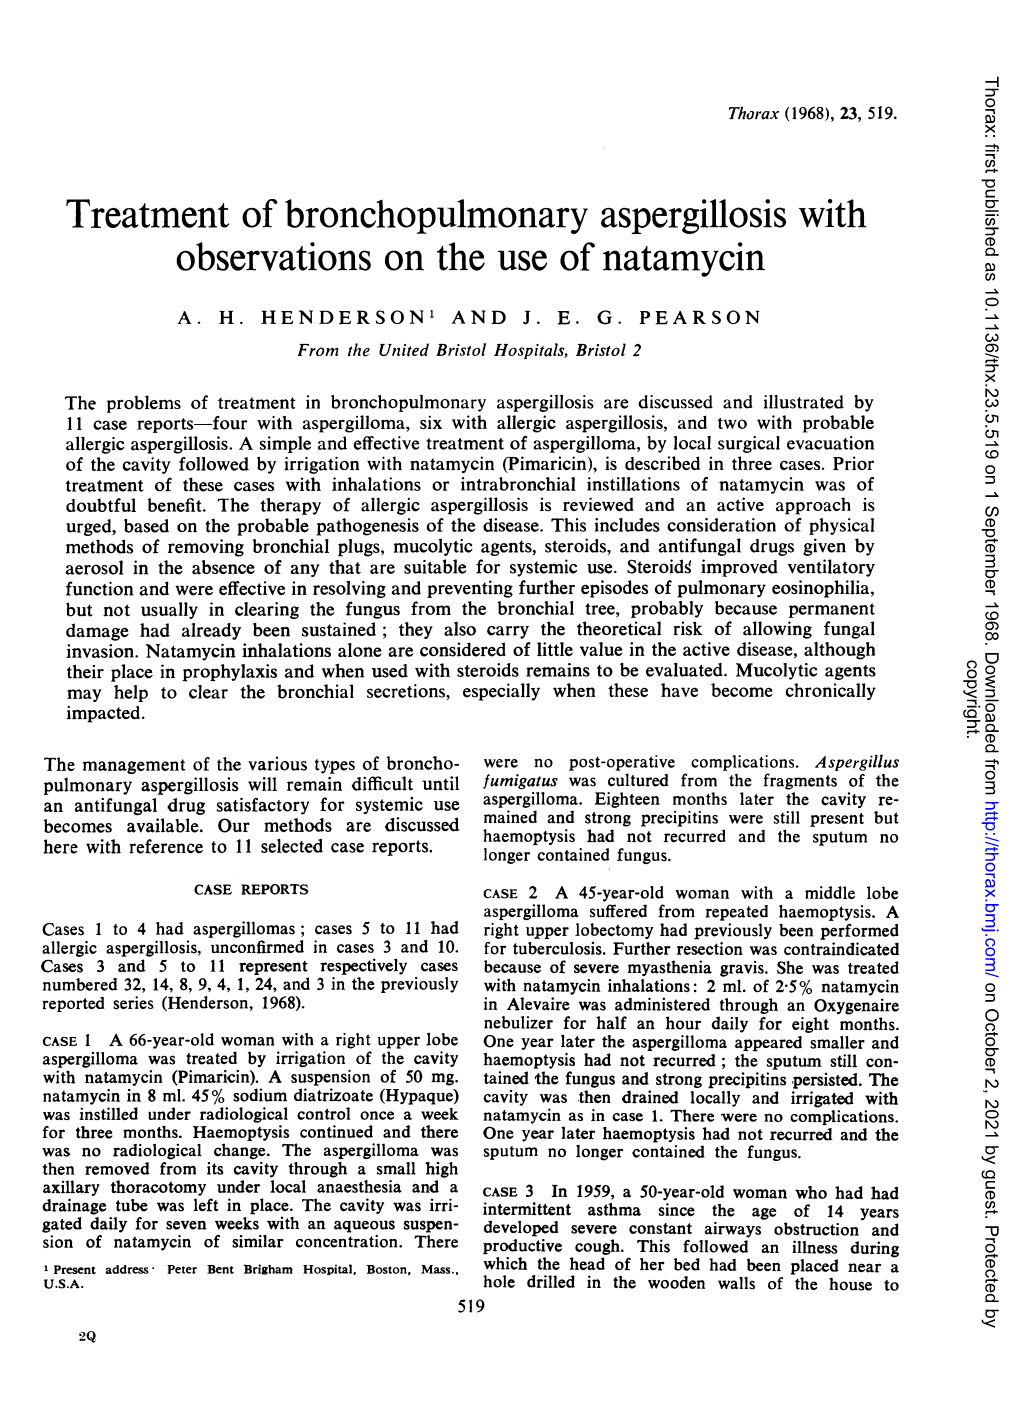 Treatment of Bronchopulmonary Aspergillosis with Observations on the Use of Natamycin